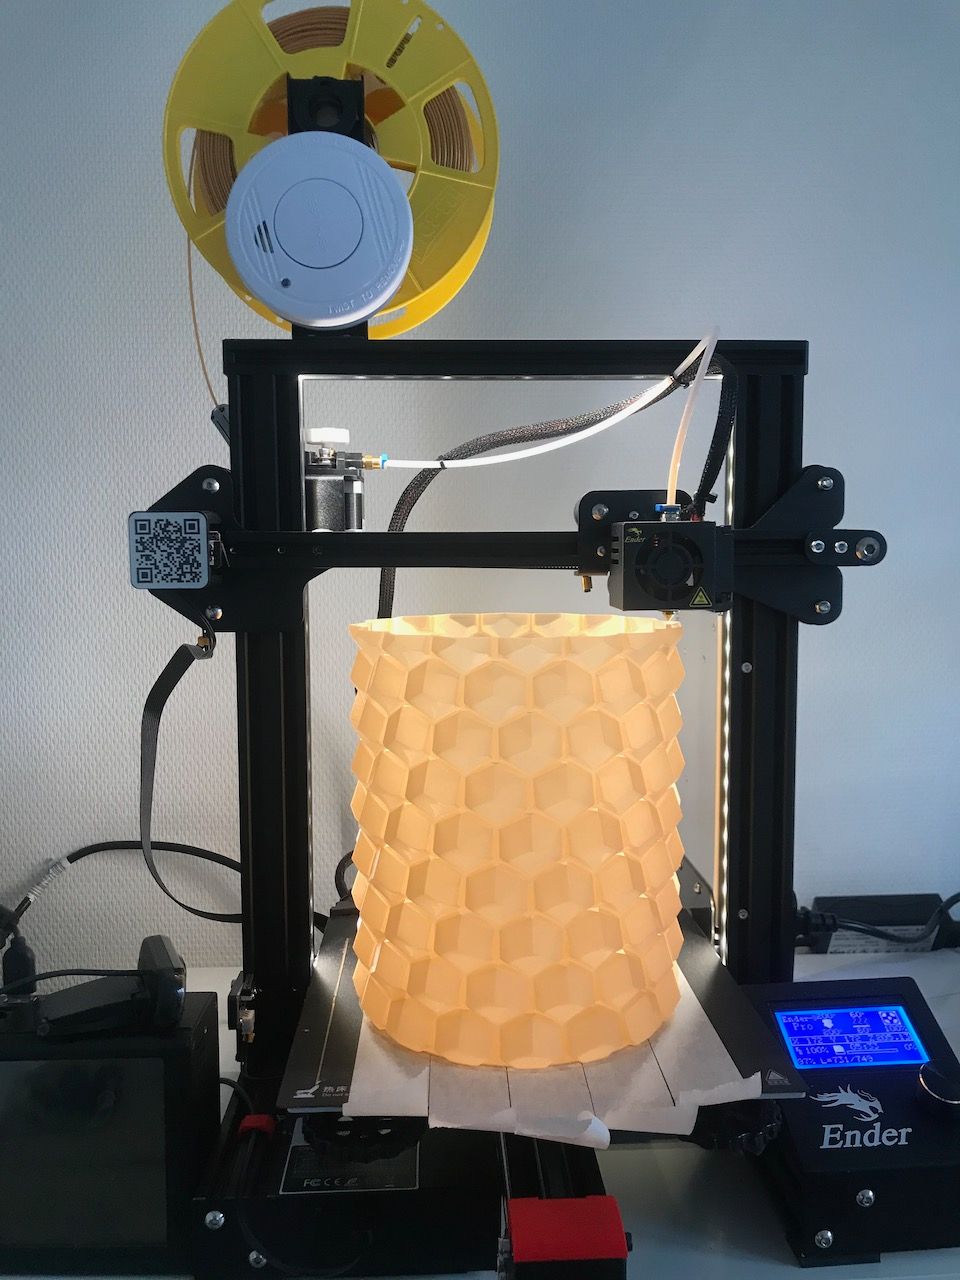 lampshade printing on a ender 3 pro